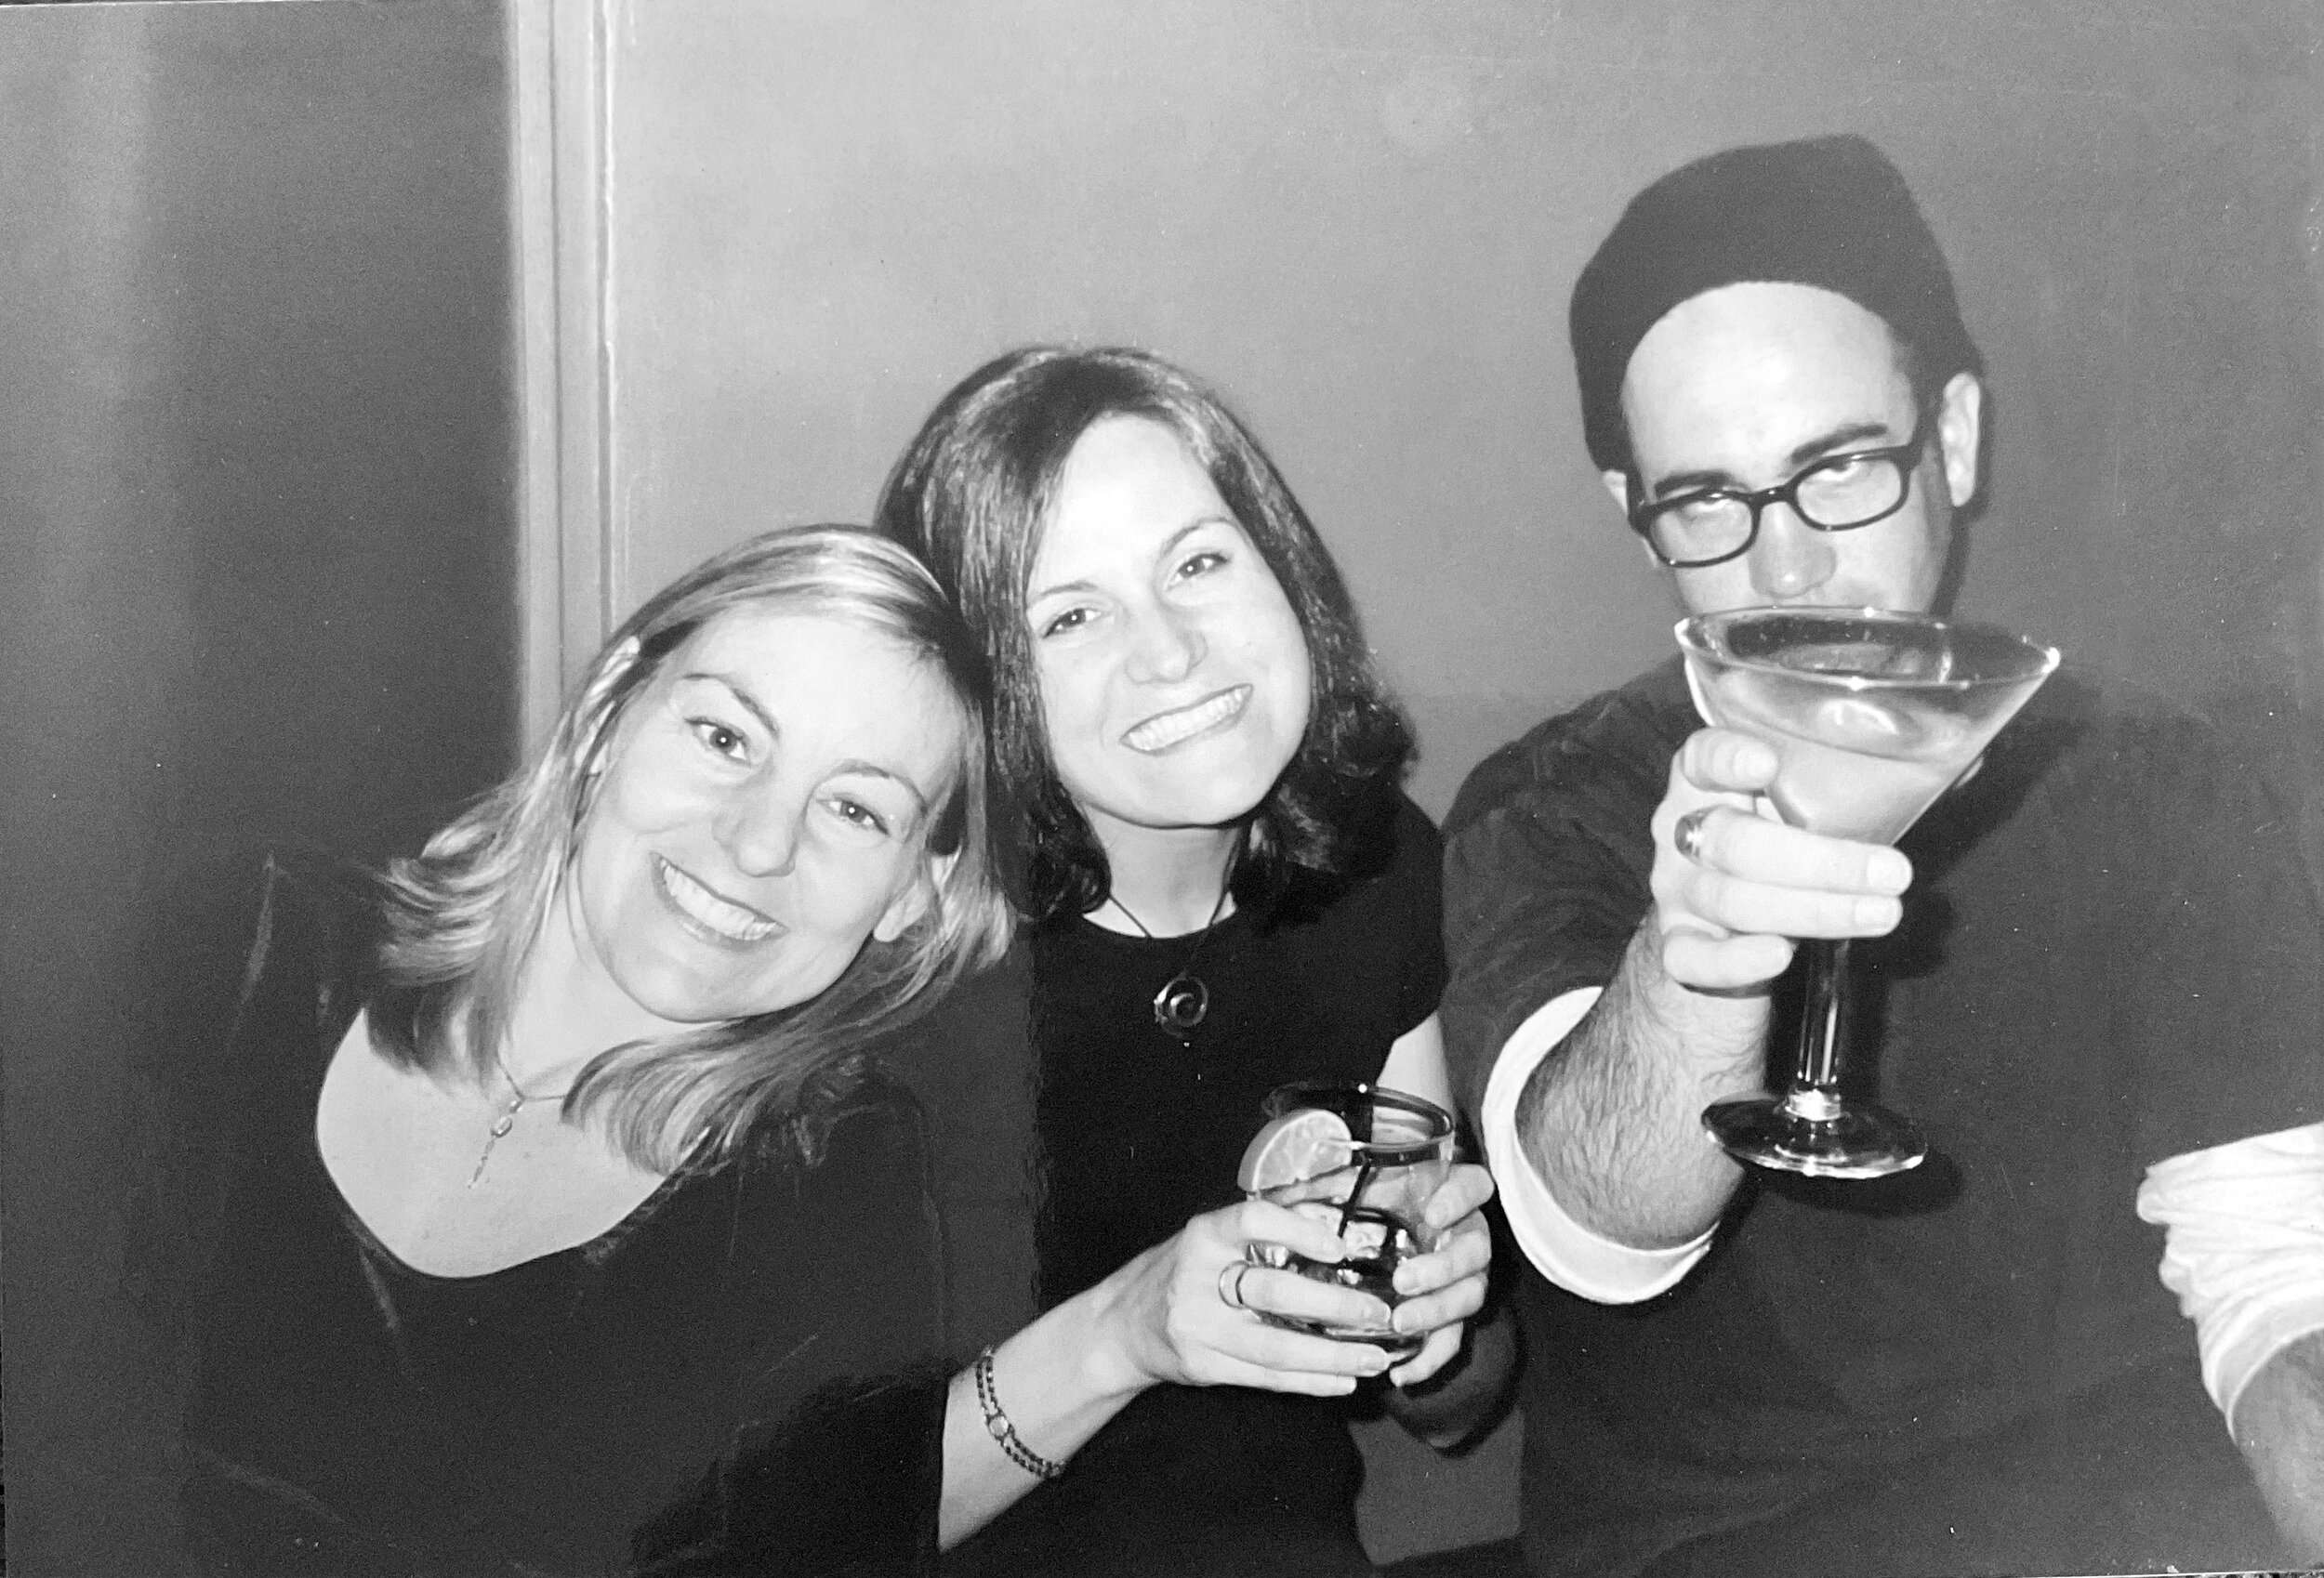  Jaqui Lopez, Trish Krause, &amp; Matt Wallin at a party in The Mission district circa 1996.  